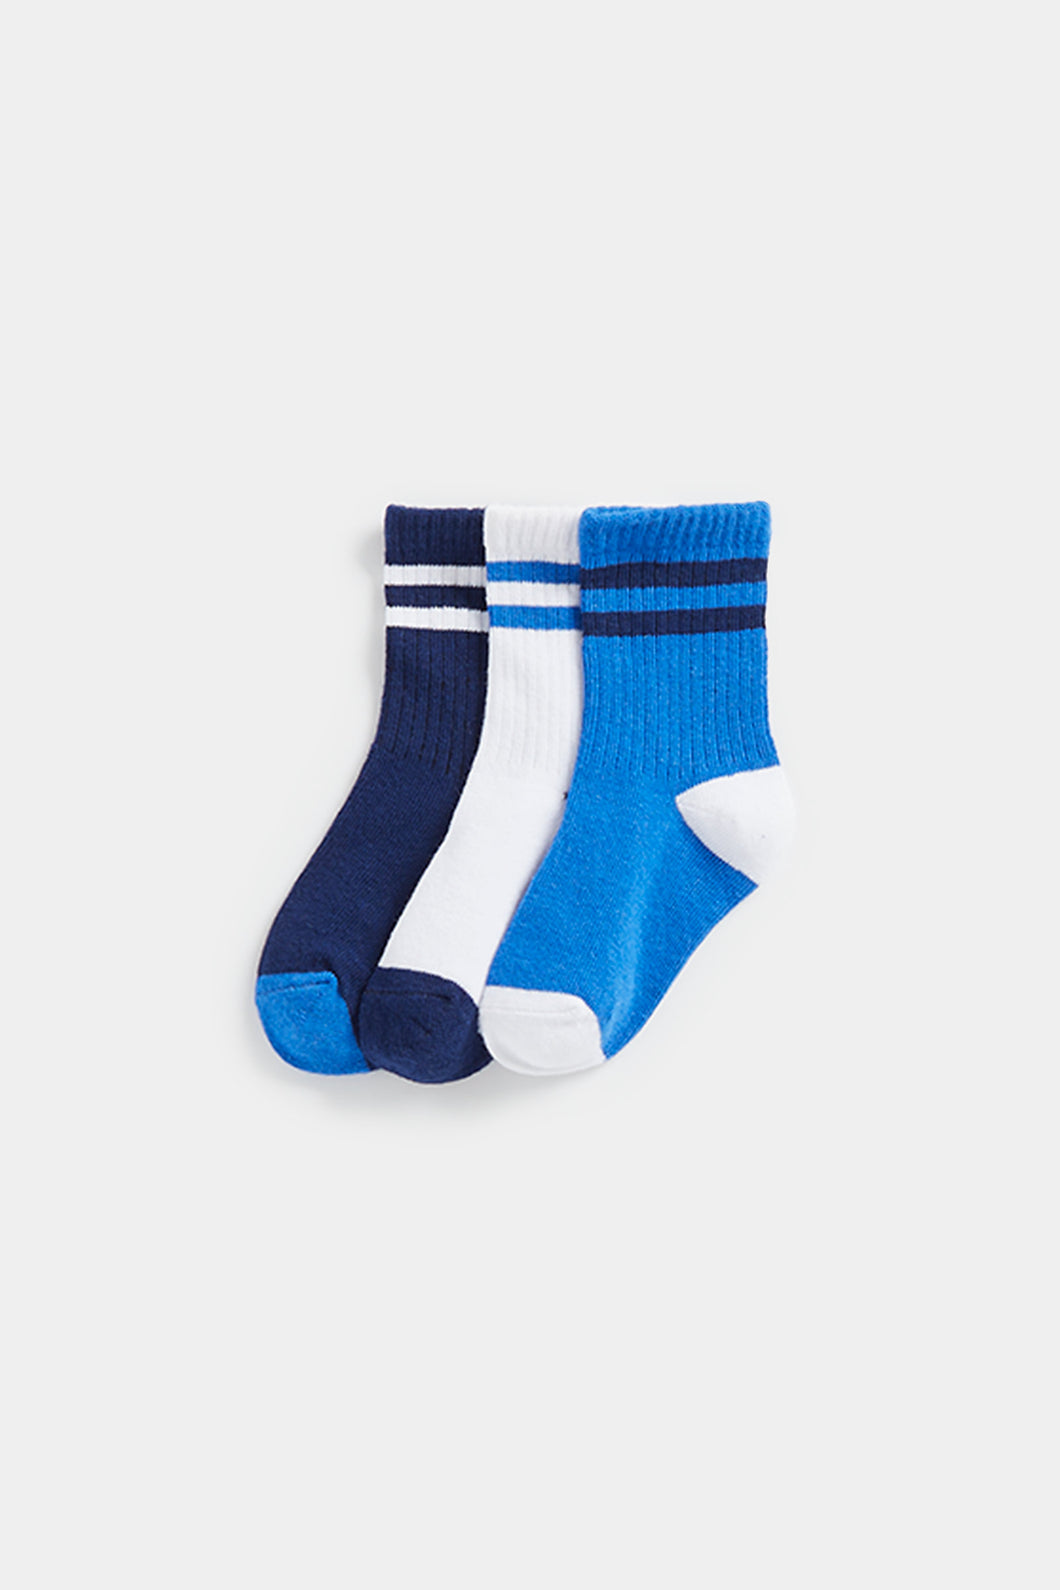 Mothercare Sports Socks - 3 Pack